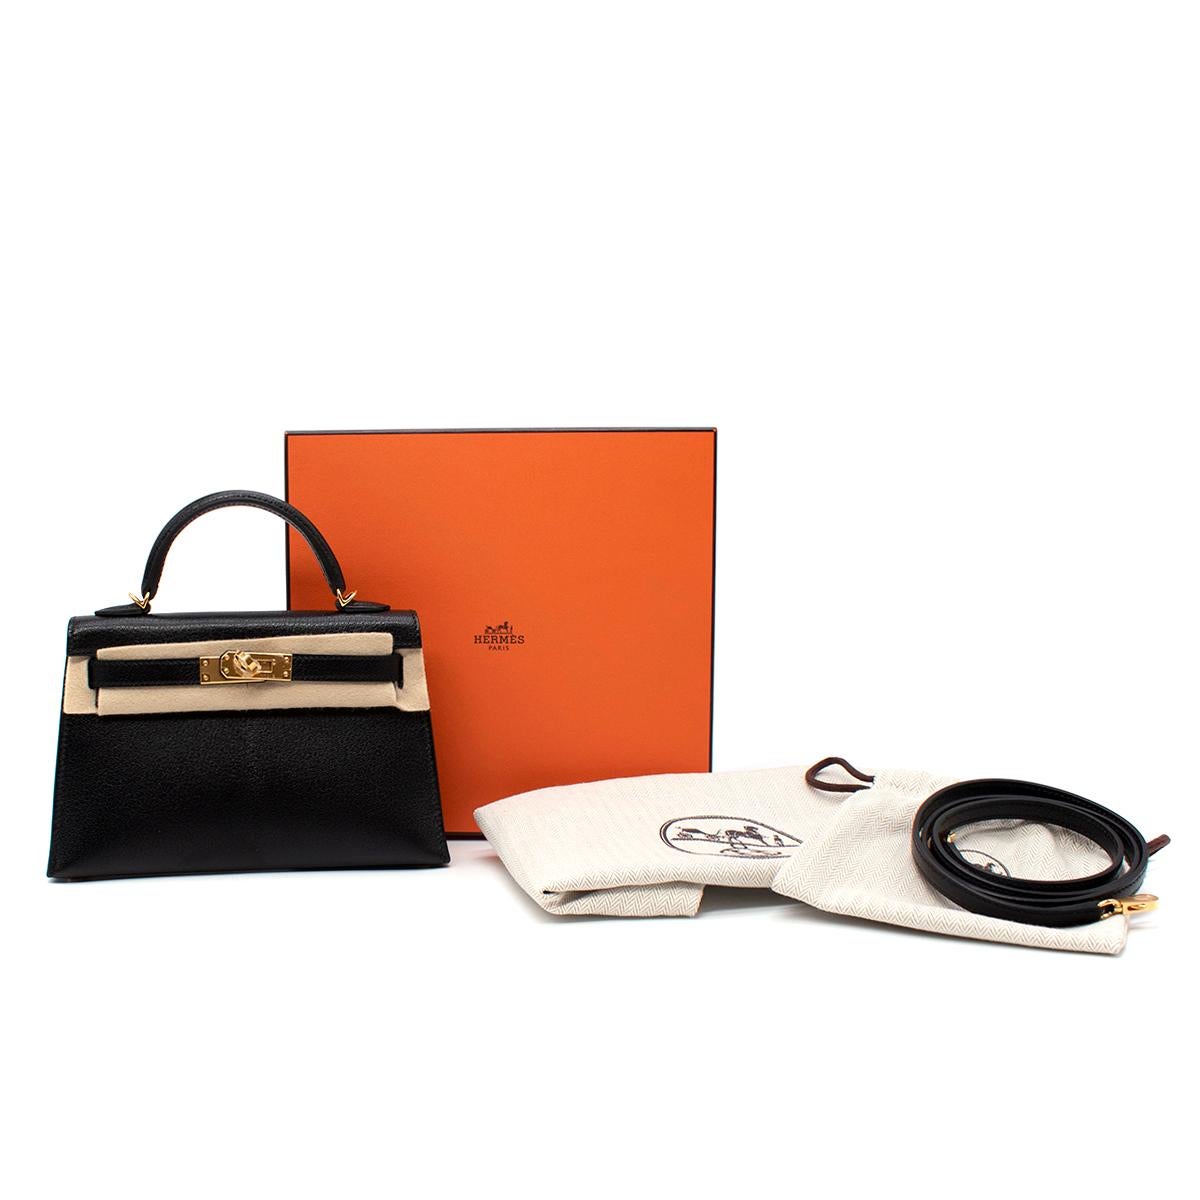 Hermes Black Chevre Mini Kelly Sellier II GHW 

- Crafted in Glossy Chevre Chamkila
- Official colour - Noir
- Gold hardware
- Removable Shoulder strap
- Classic Turnlock Belted Closure
- Full set

Age: 2021

Shipping to be confirmed upon purchase.